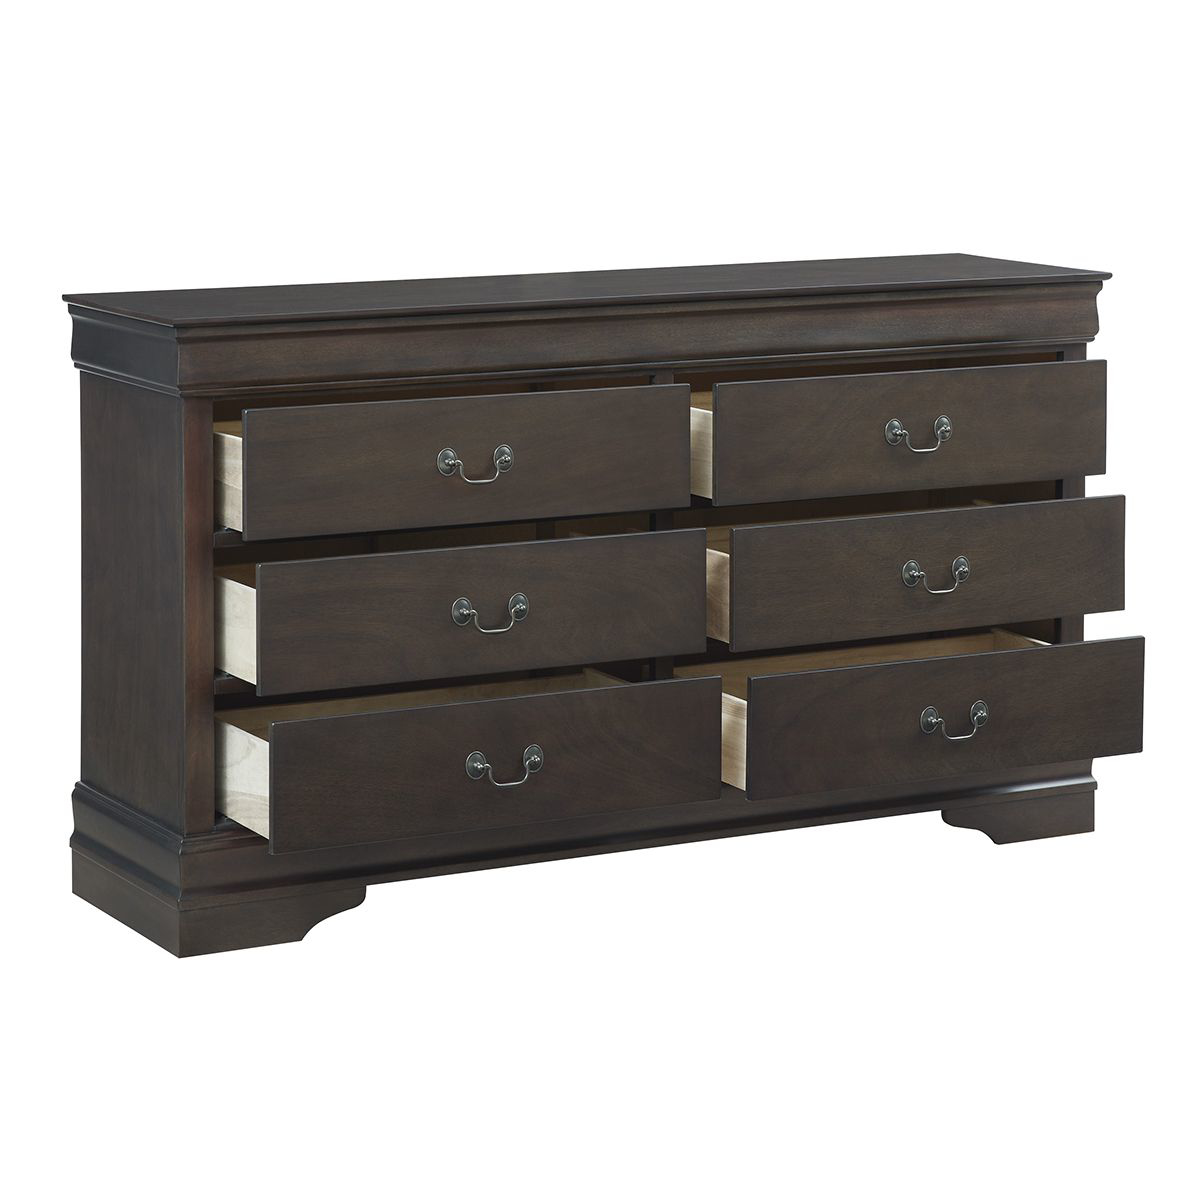 Picture of LOUIS BROWN DRESSER